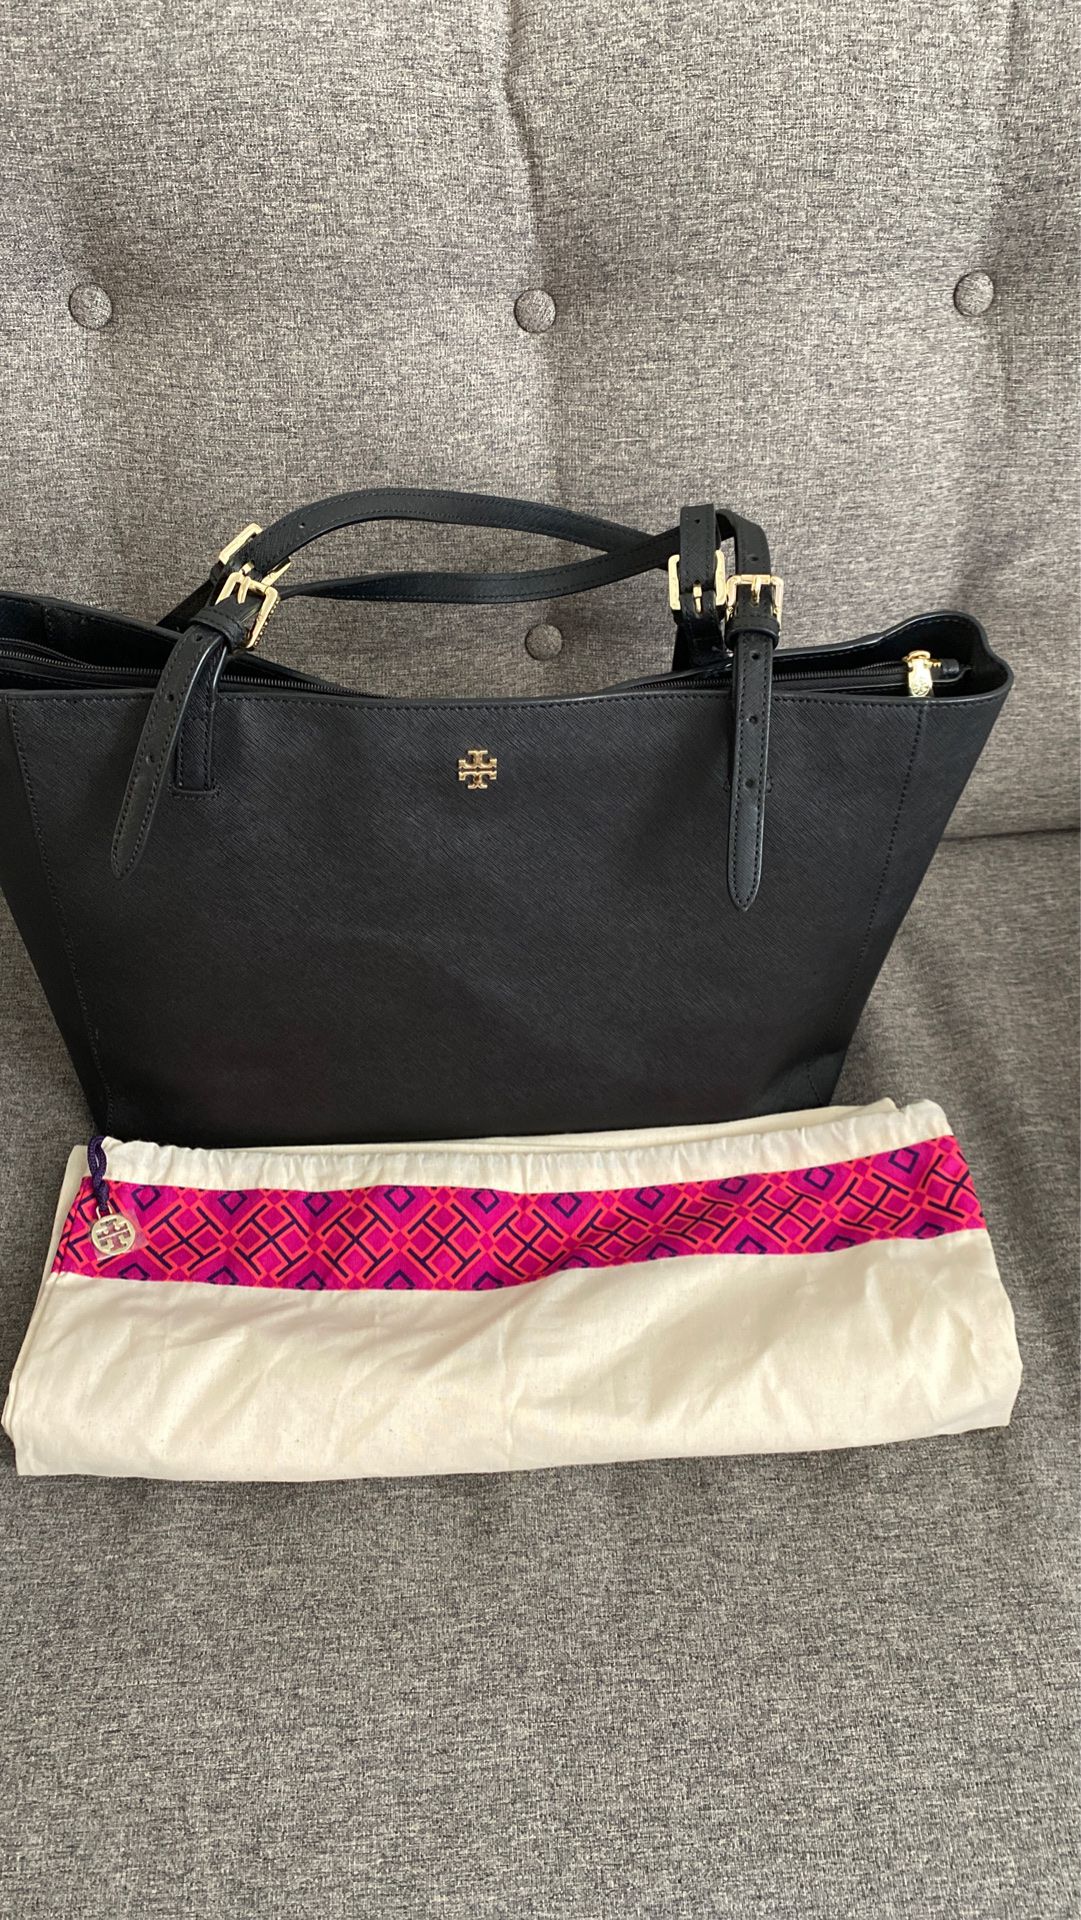 Tory Burch BagTote Excellent Condition